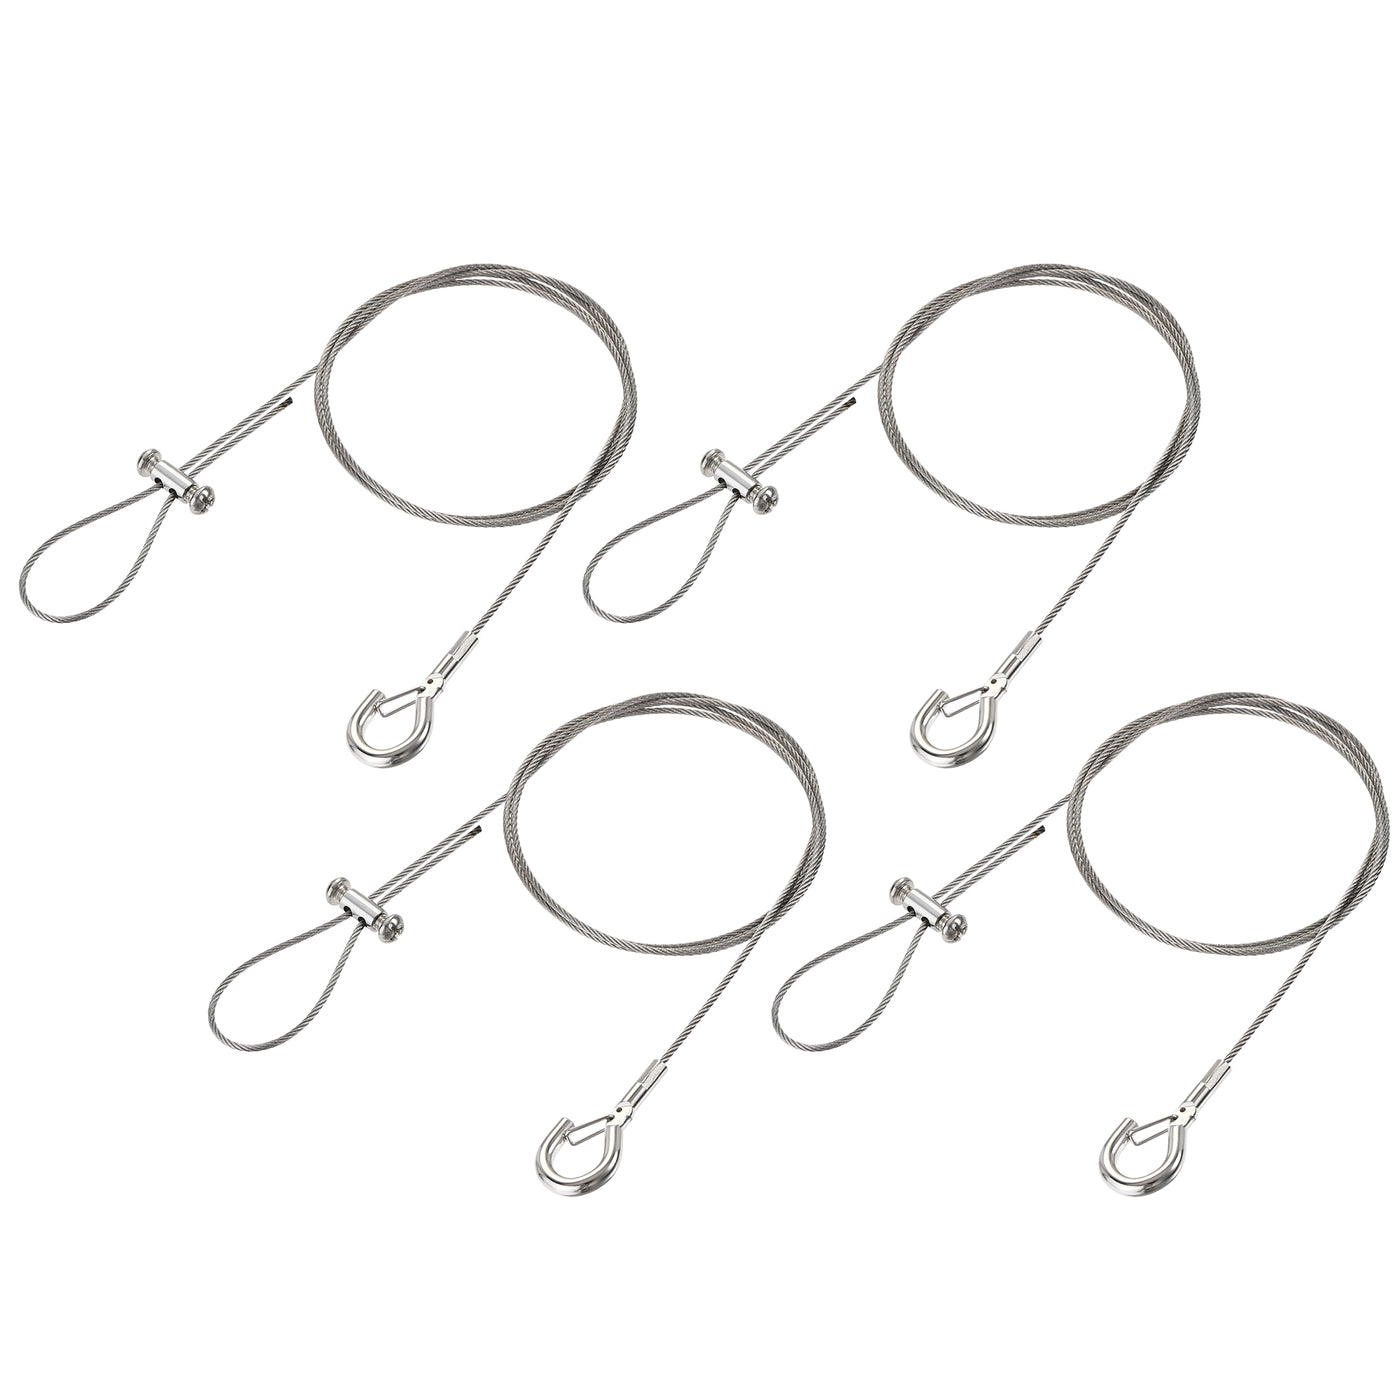 uxcell Uxcell Picture Hanging Wire Kit, 4Set 1M Adjustable Hanger Wire Hook for Home Art Gallery Picture Kit, Load 66 lbs, with Horizontal Fixing Screws